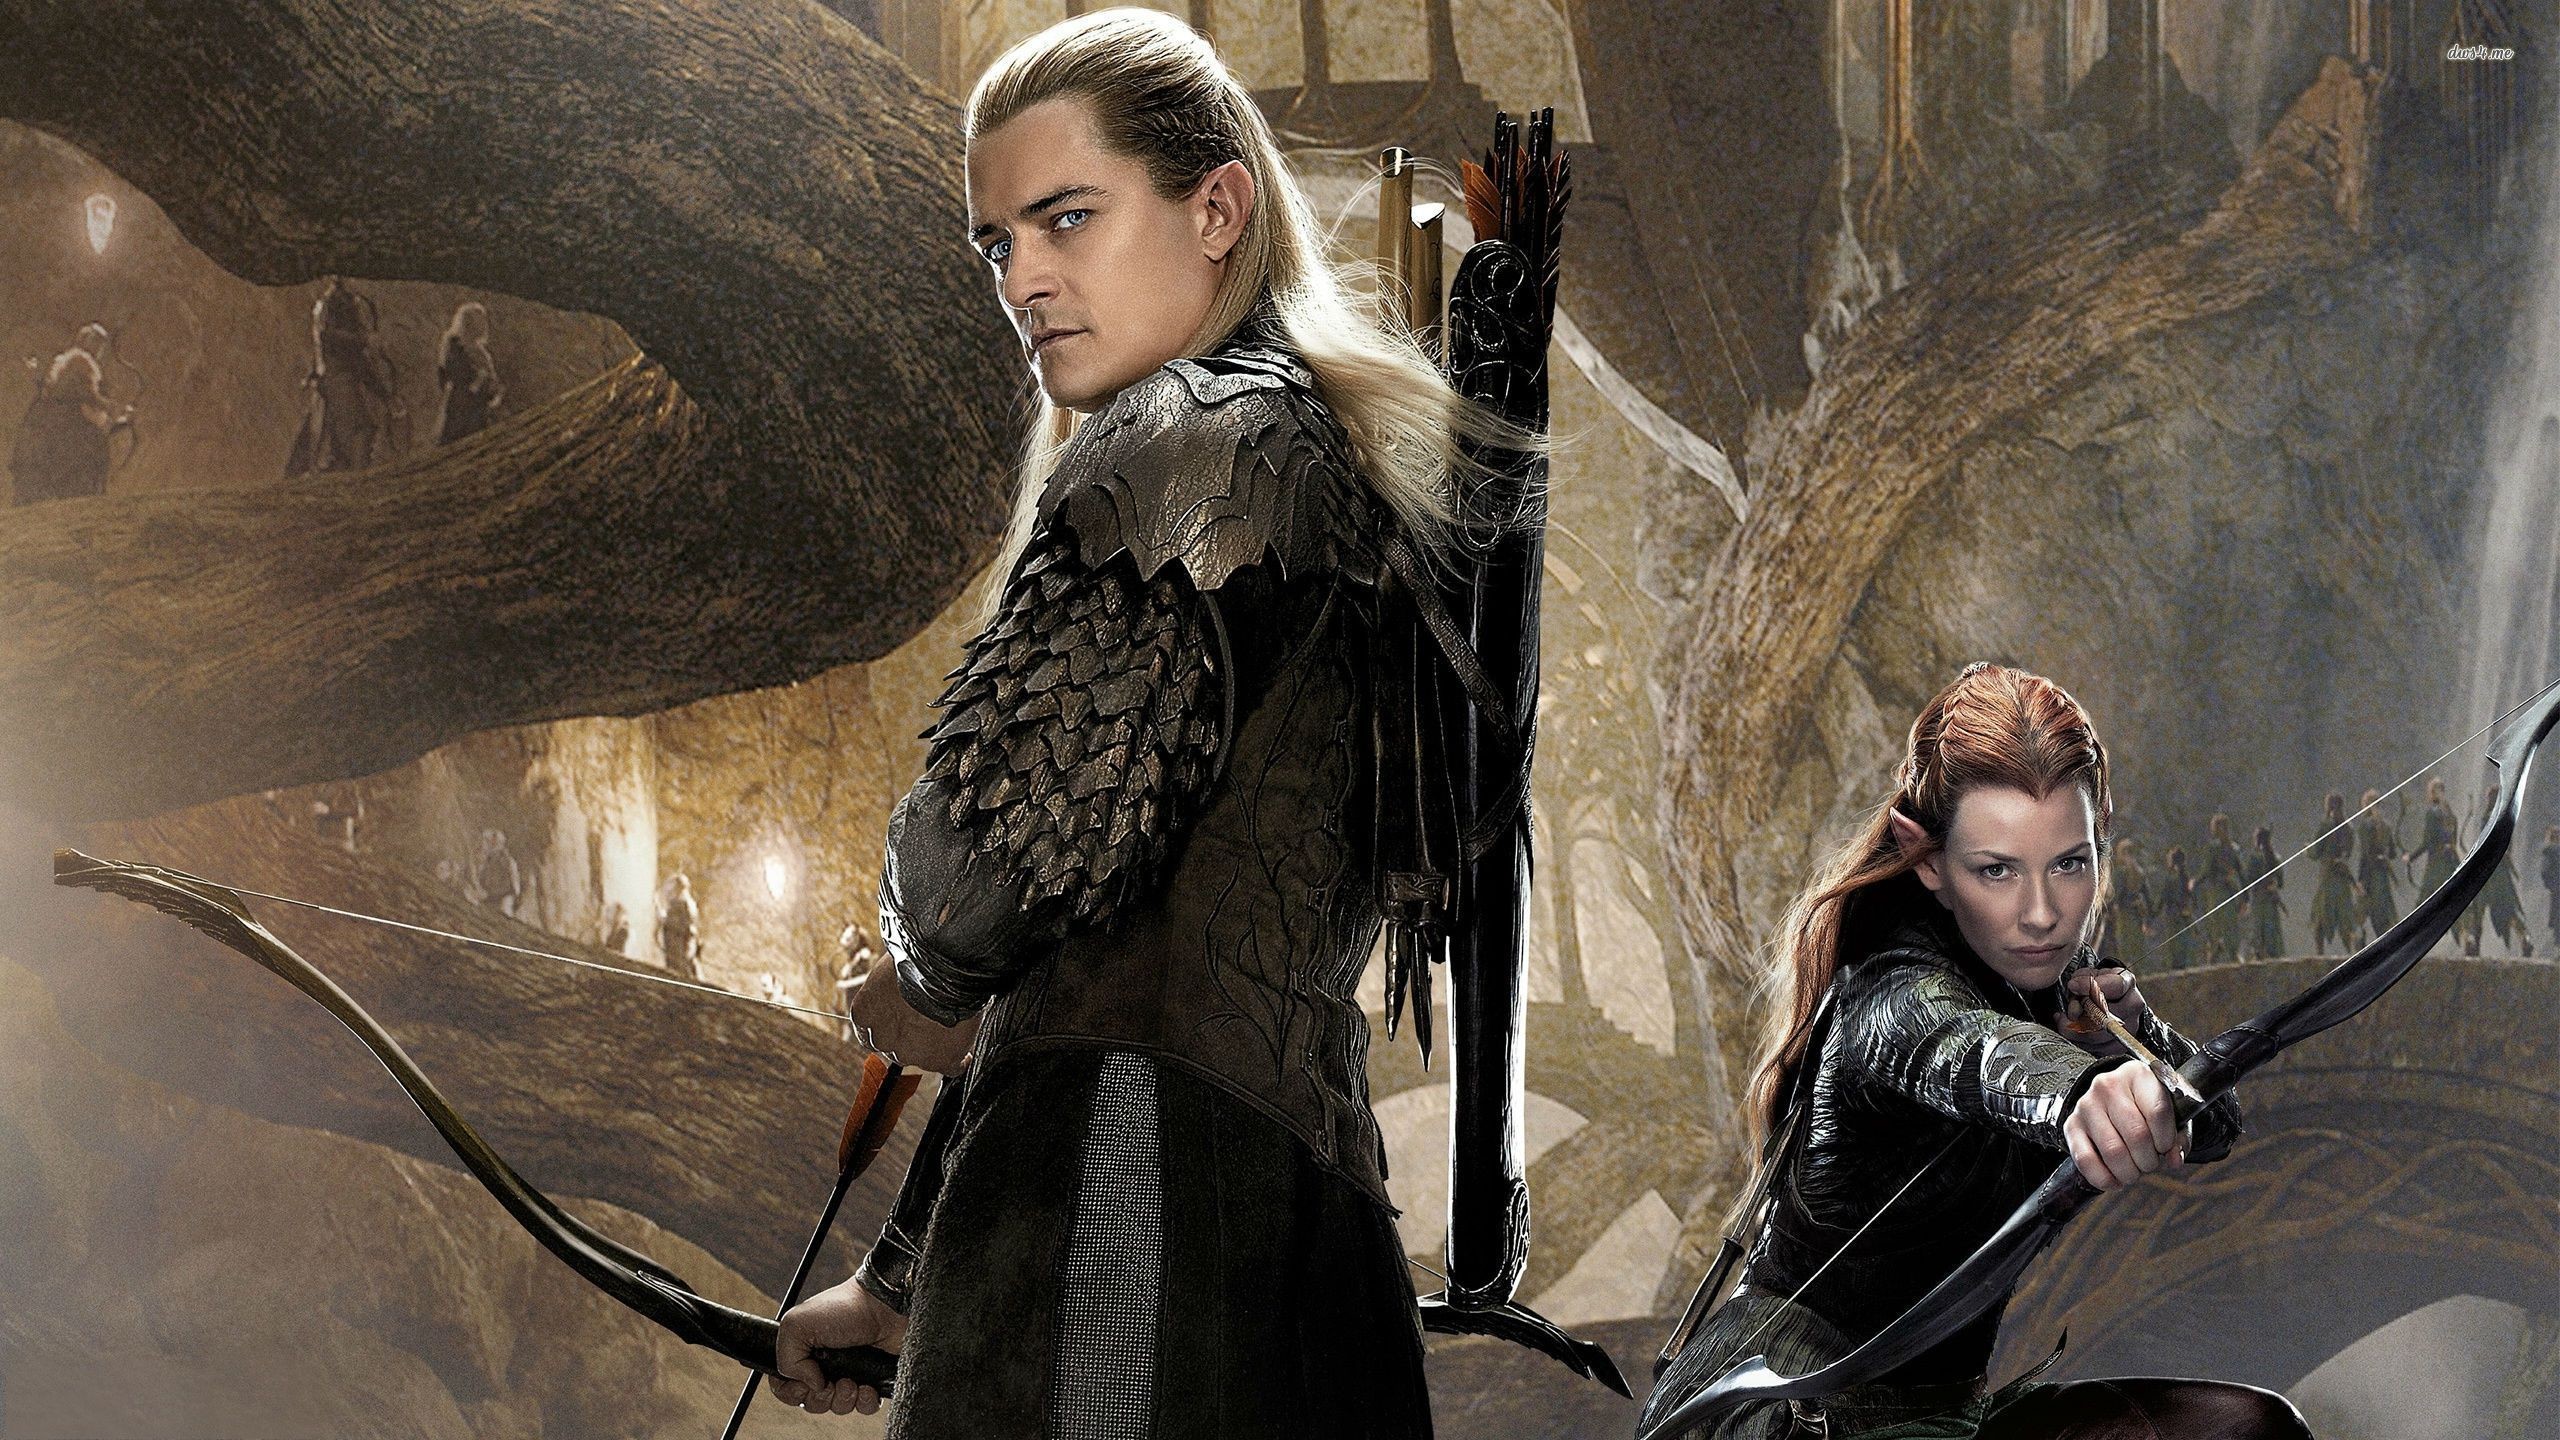 2560x1440 ... Legolas and Tauriel - The Hobbit - The Desolation of Smaug wallpaper   ...